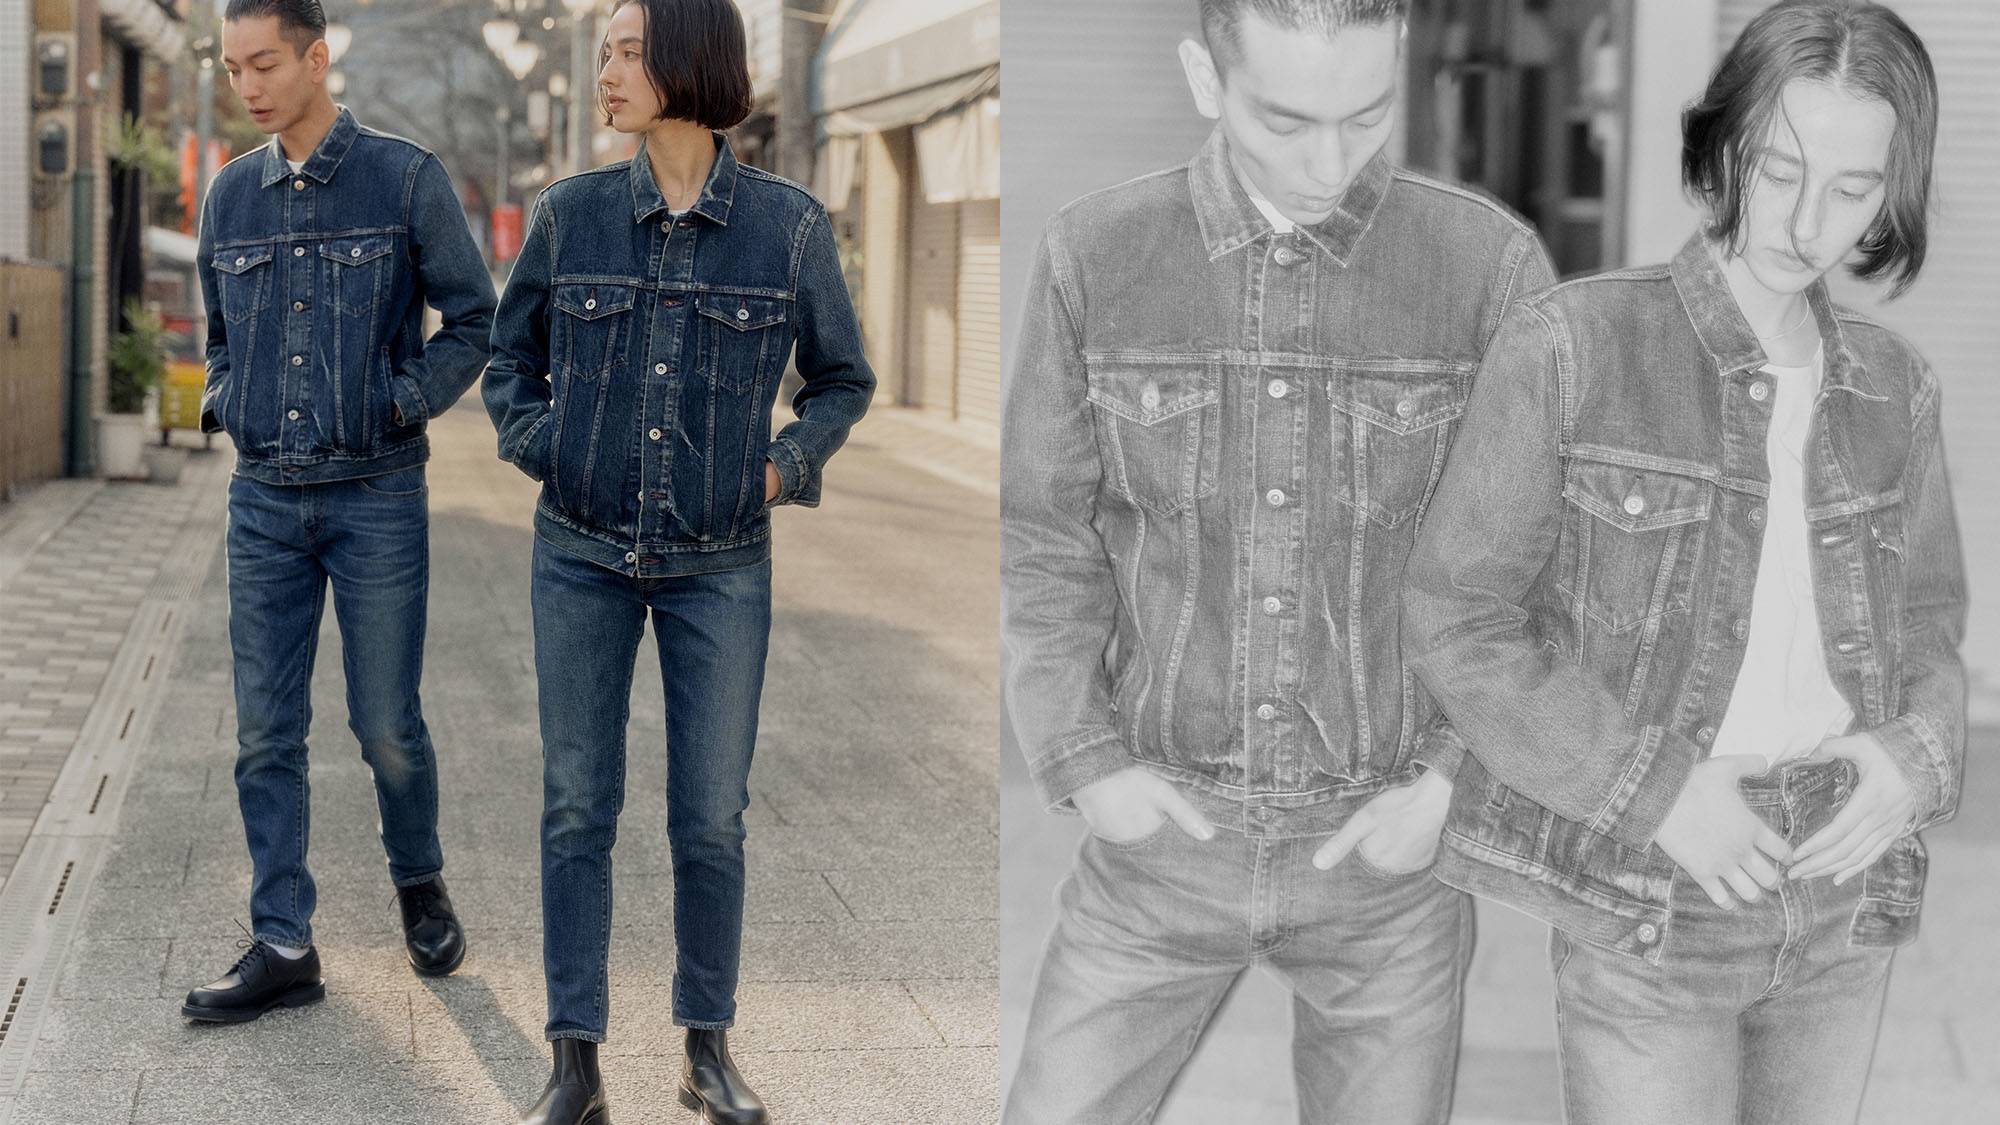 Levis® Made in Japan darkwash selvedge denim denim jacket and pants styled on female and male model in classic Japanese town.